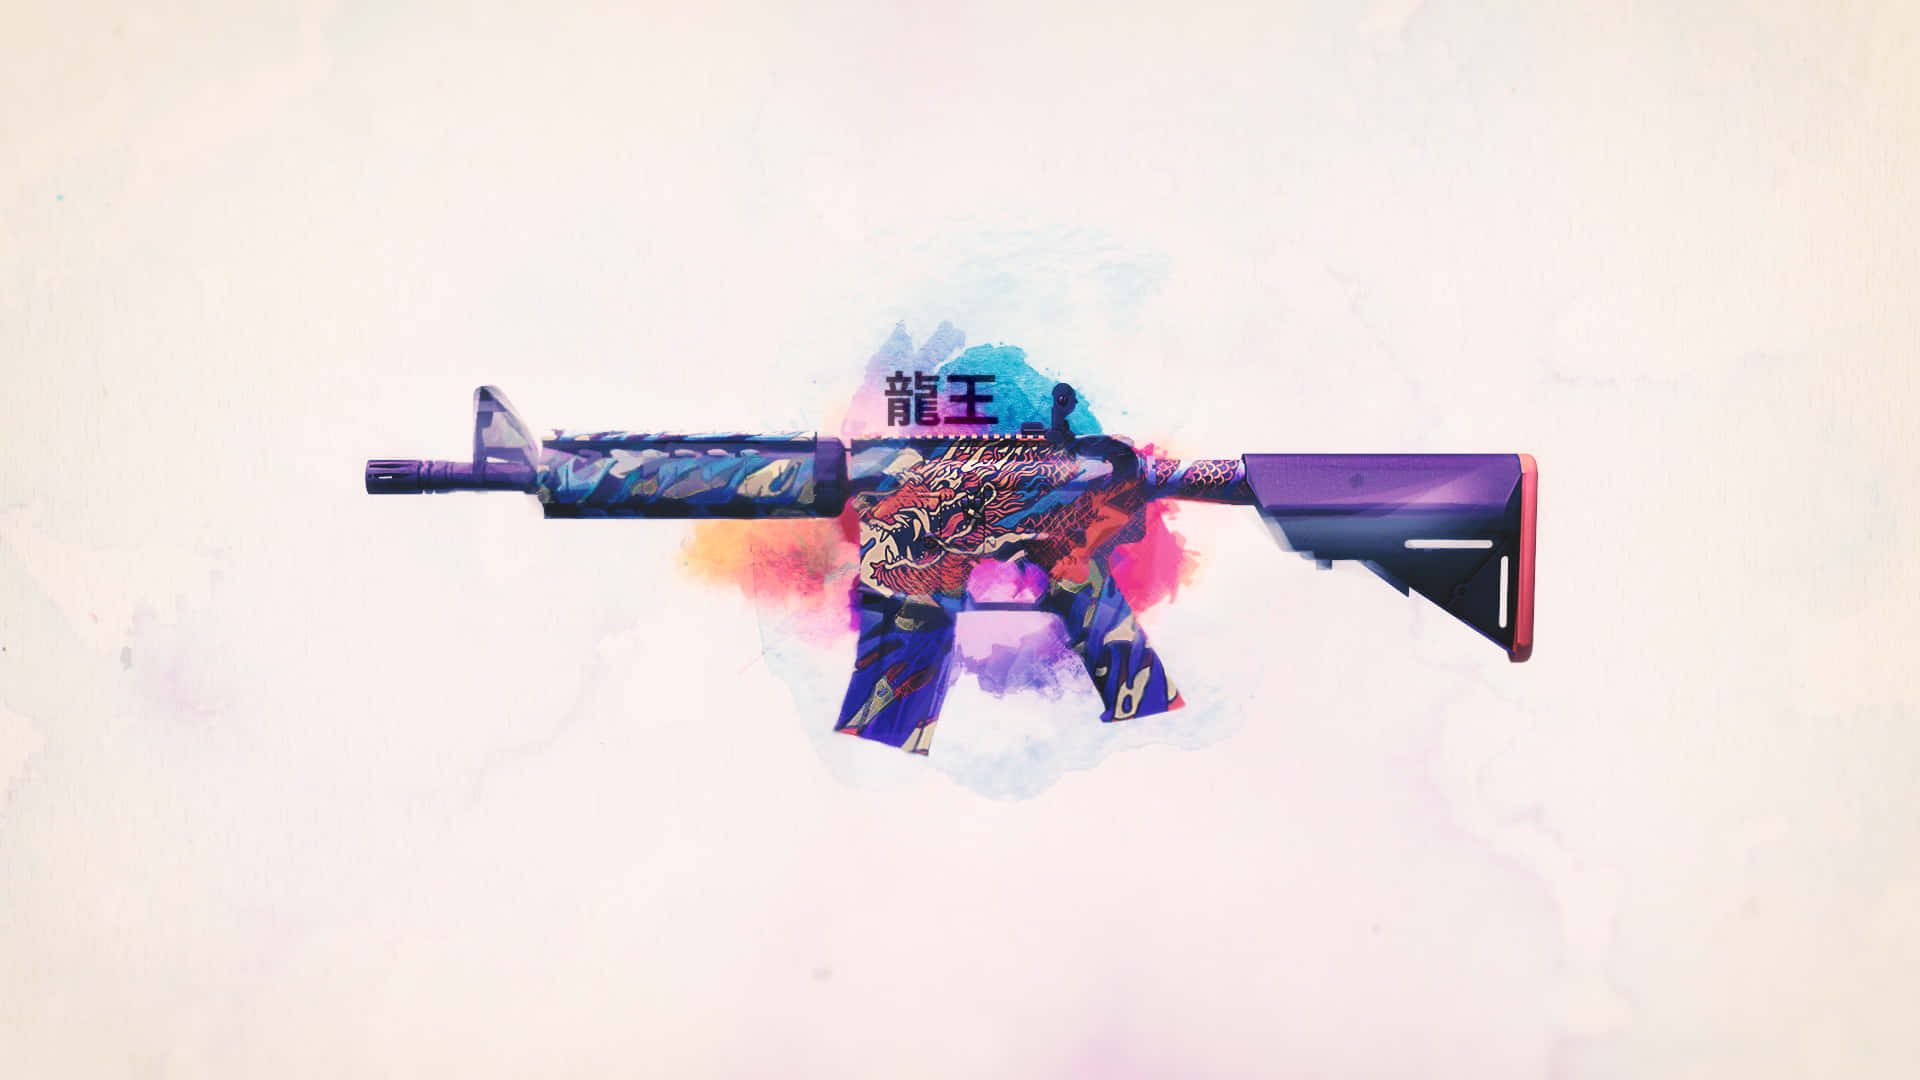 Dragon M4A4 Painting 1080p Counter Strike Global Offensive Background